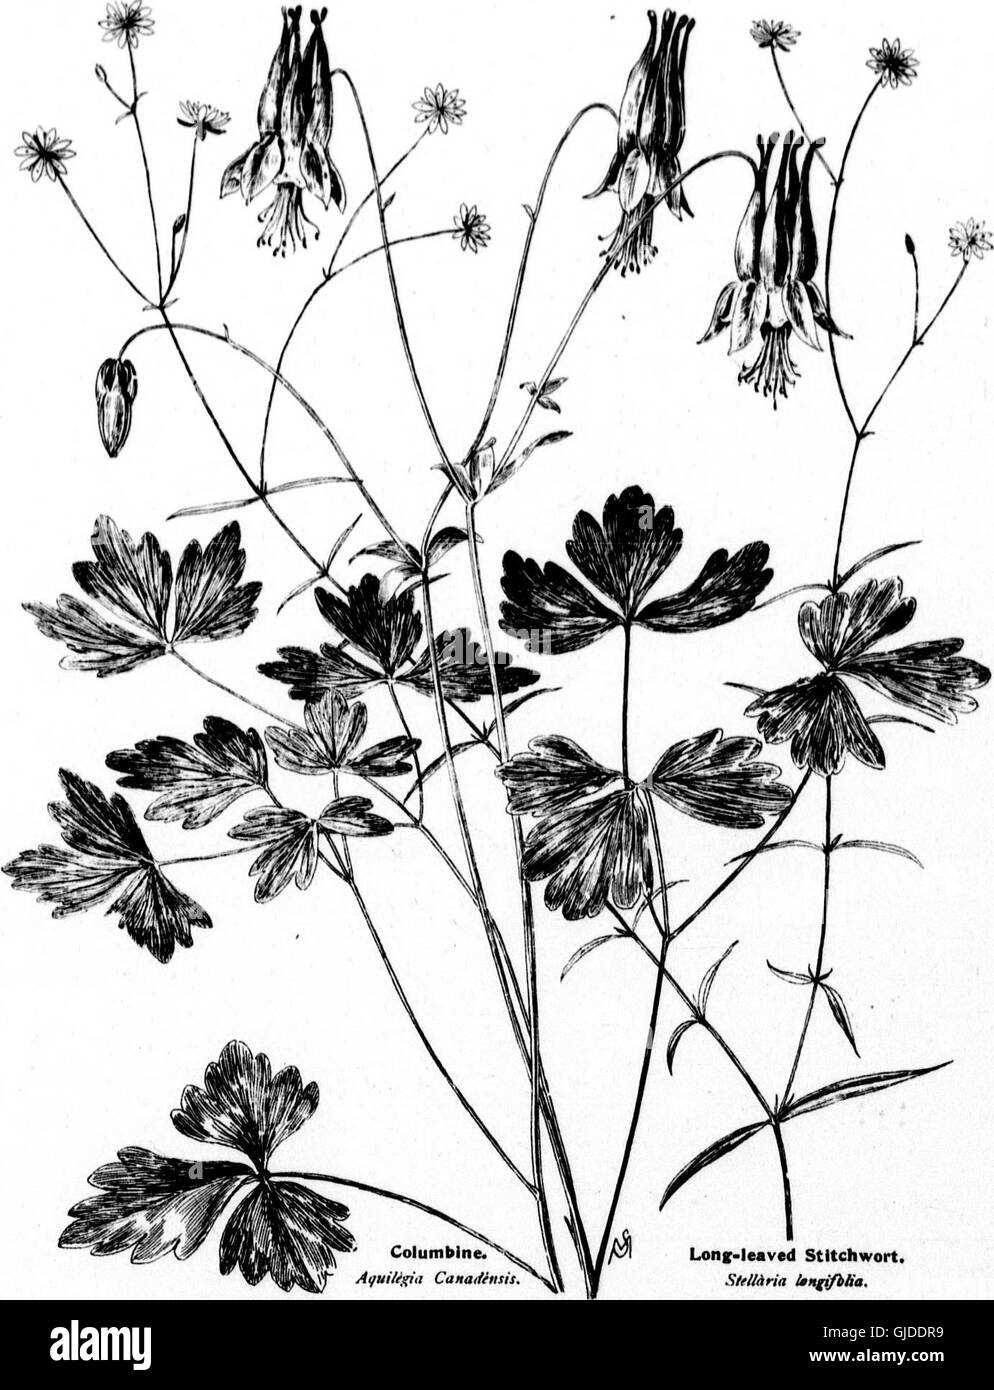 Wayside flowers (microform) - Series II. Being a description of American wild flowers that bloom in late May, June, July and early August (1898) Stock Photo